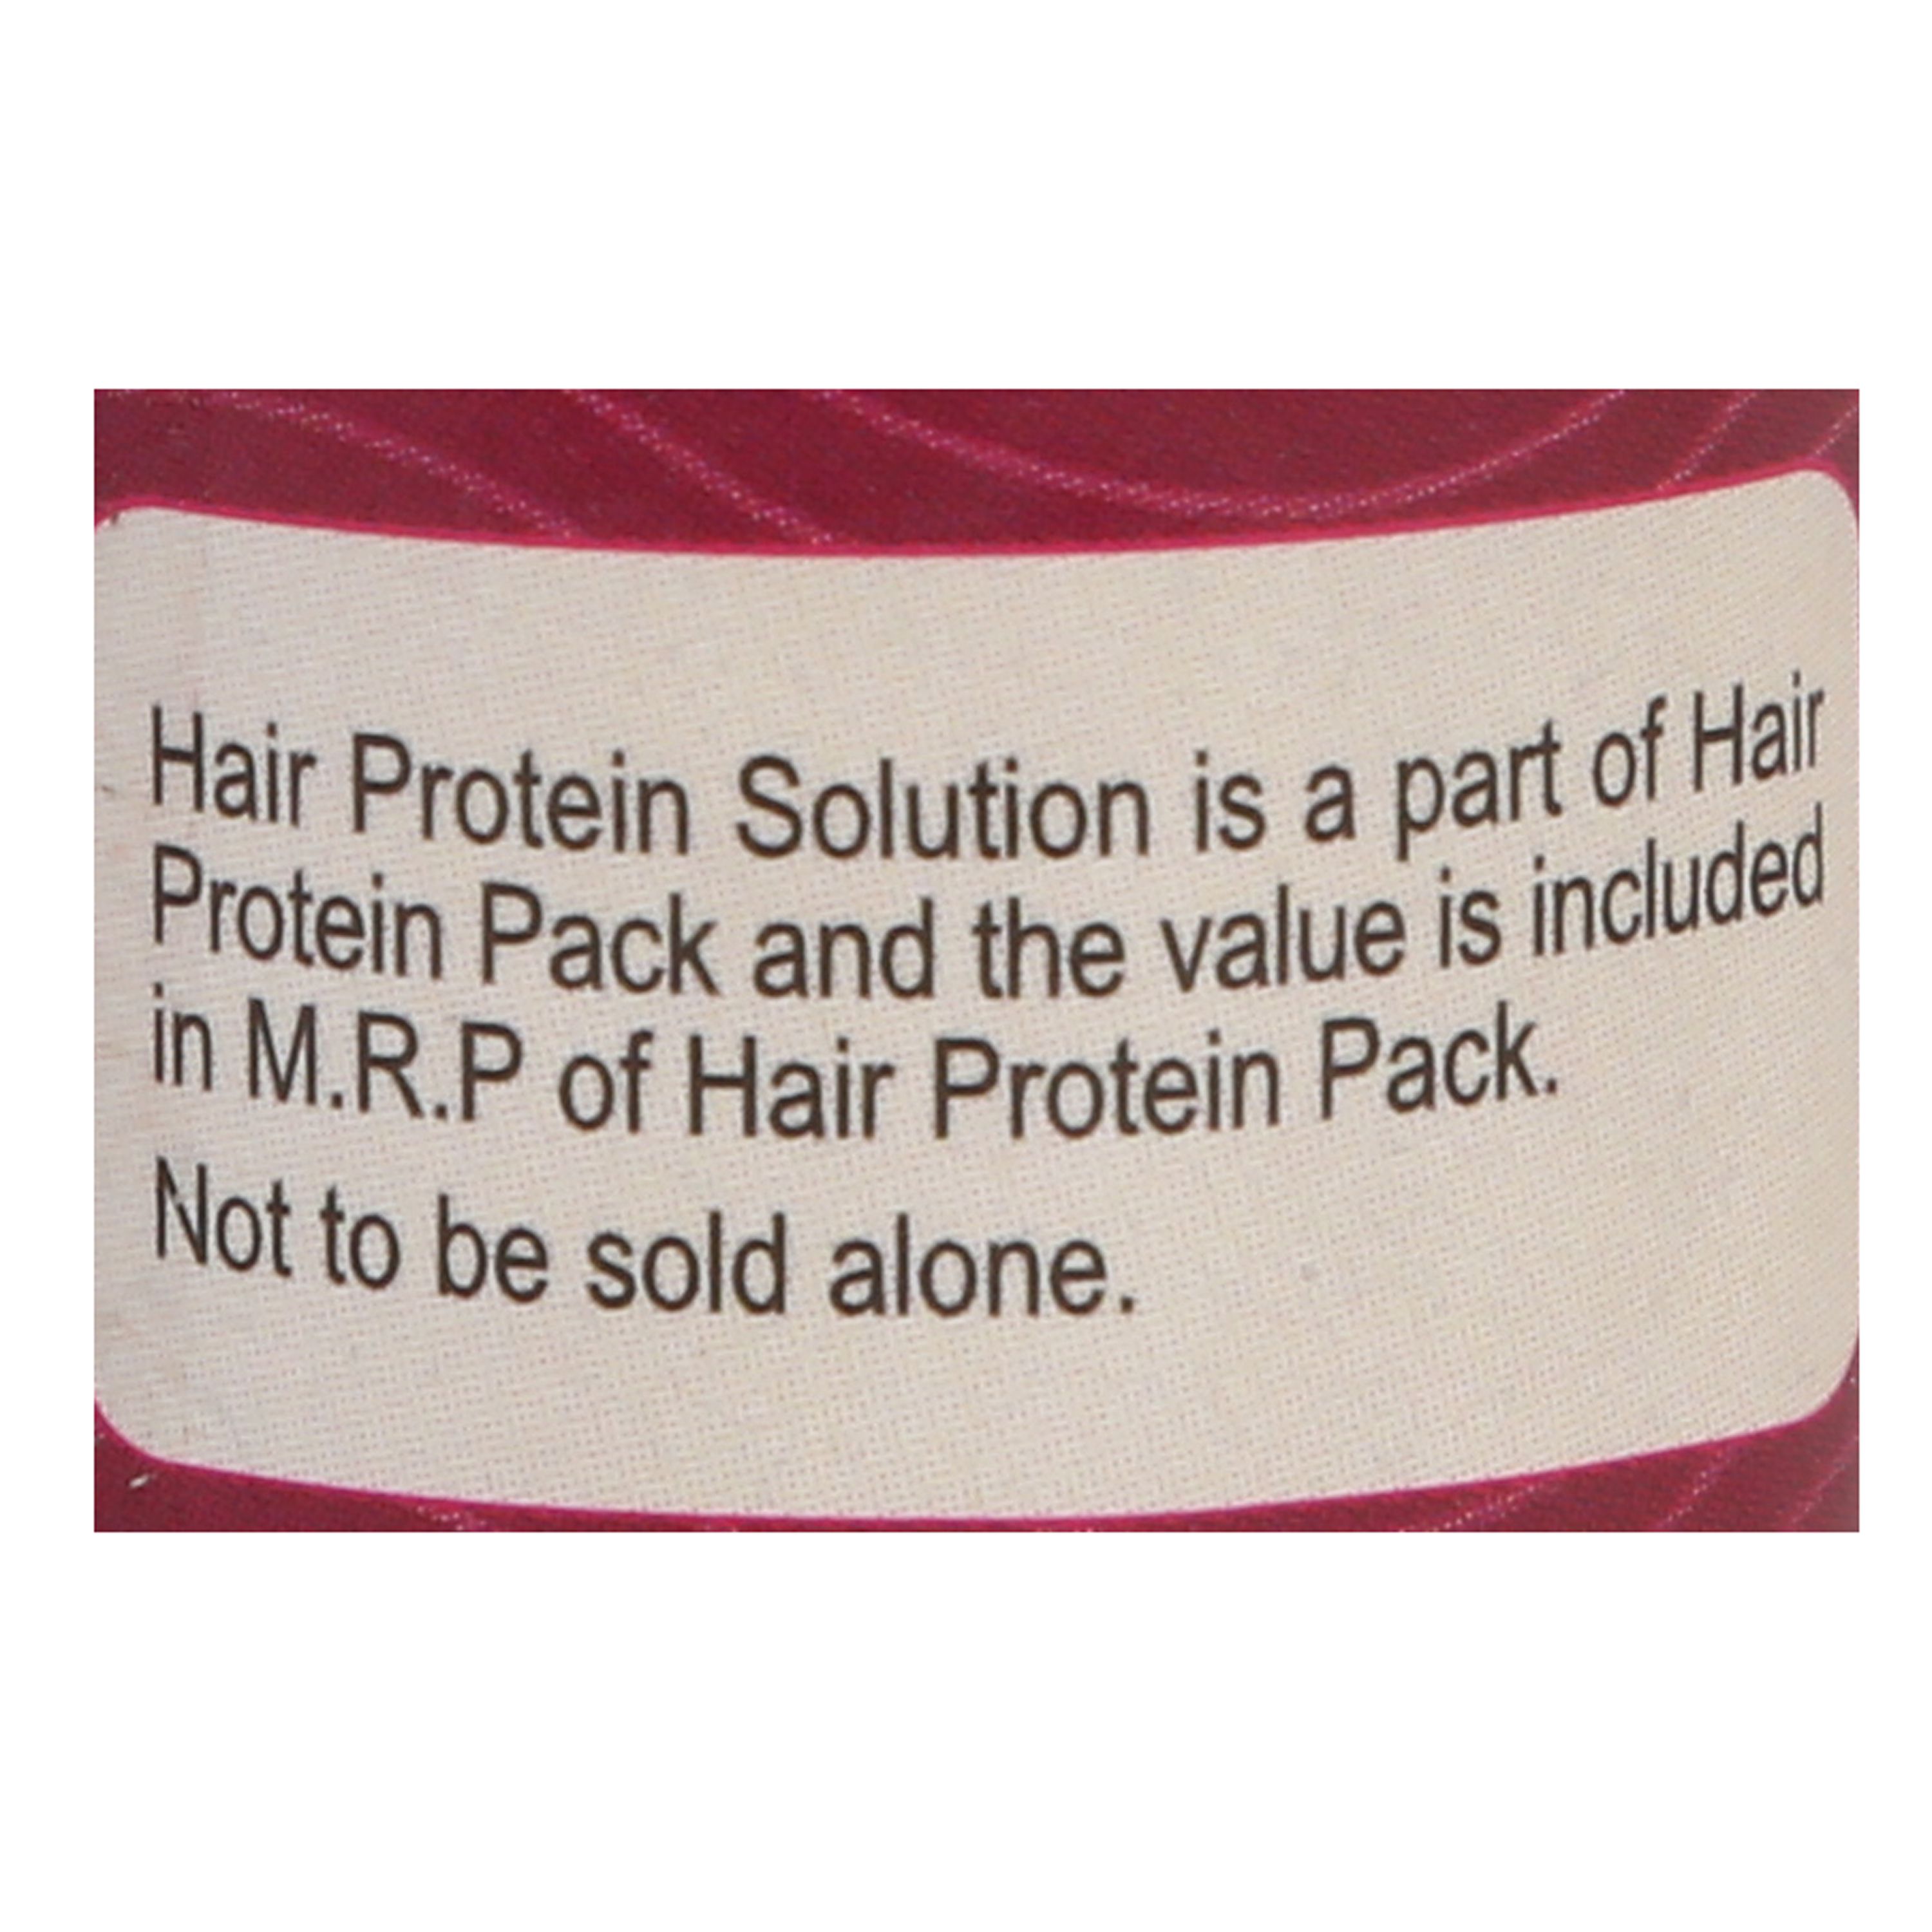 Hair Protein Pack with Hair Protein Solution by Keya Seth Aromatherapy,:  Buy Hair Protein Pack with Hair Protein Solution by Keya Seth Aromatherapy,  at Best Prices in India - Snapdeal